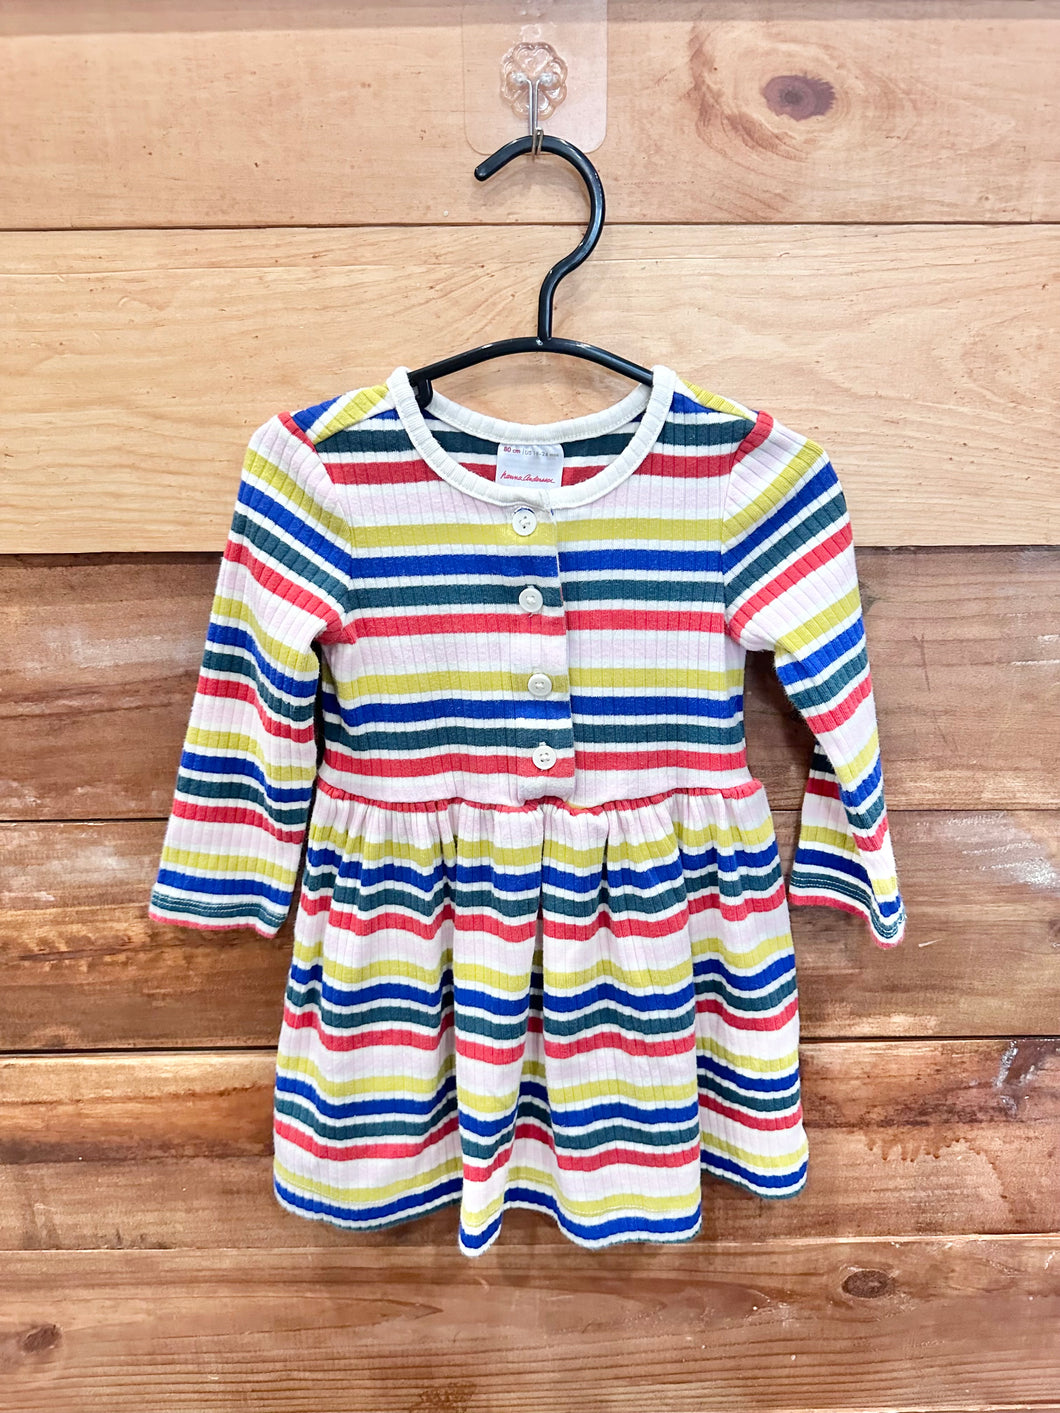 Hanna Andersson Striped Dress Size 18-24m